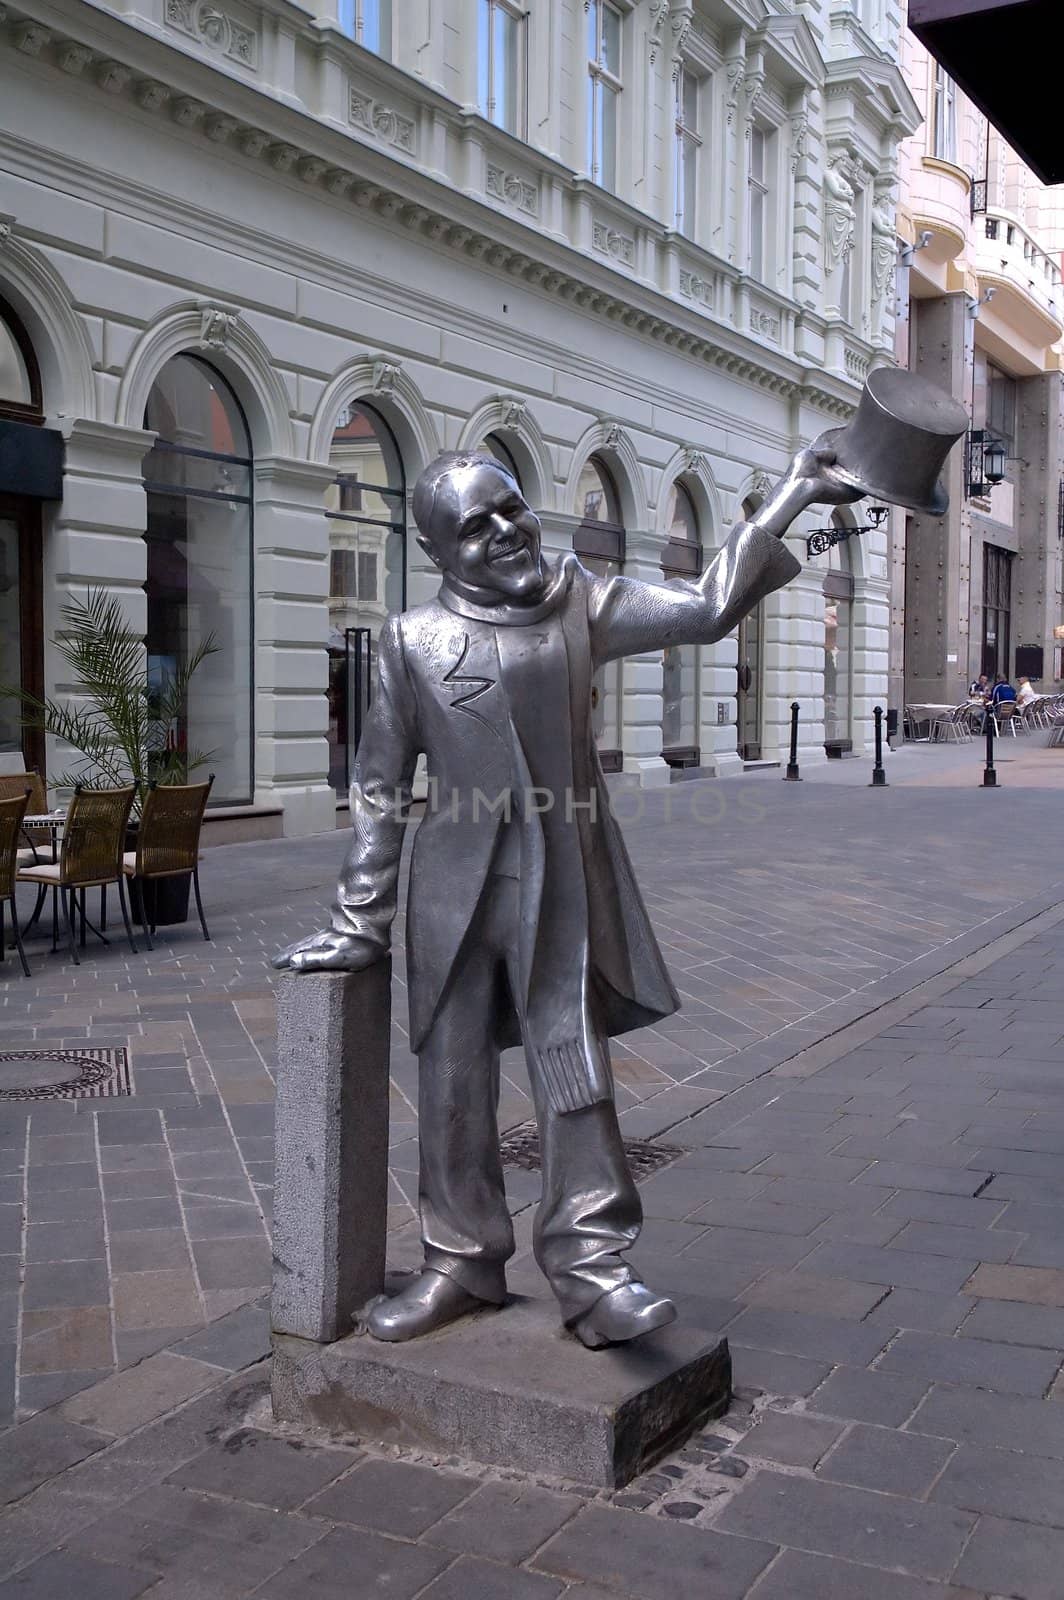 funny sculpture of an young man greeting with his cylinder, photo taken in bratislava